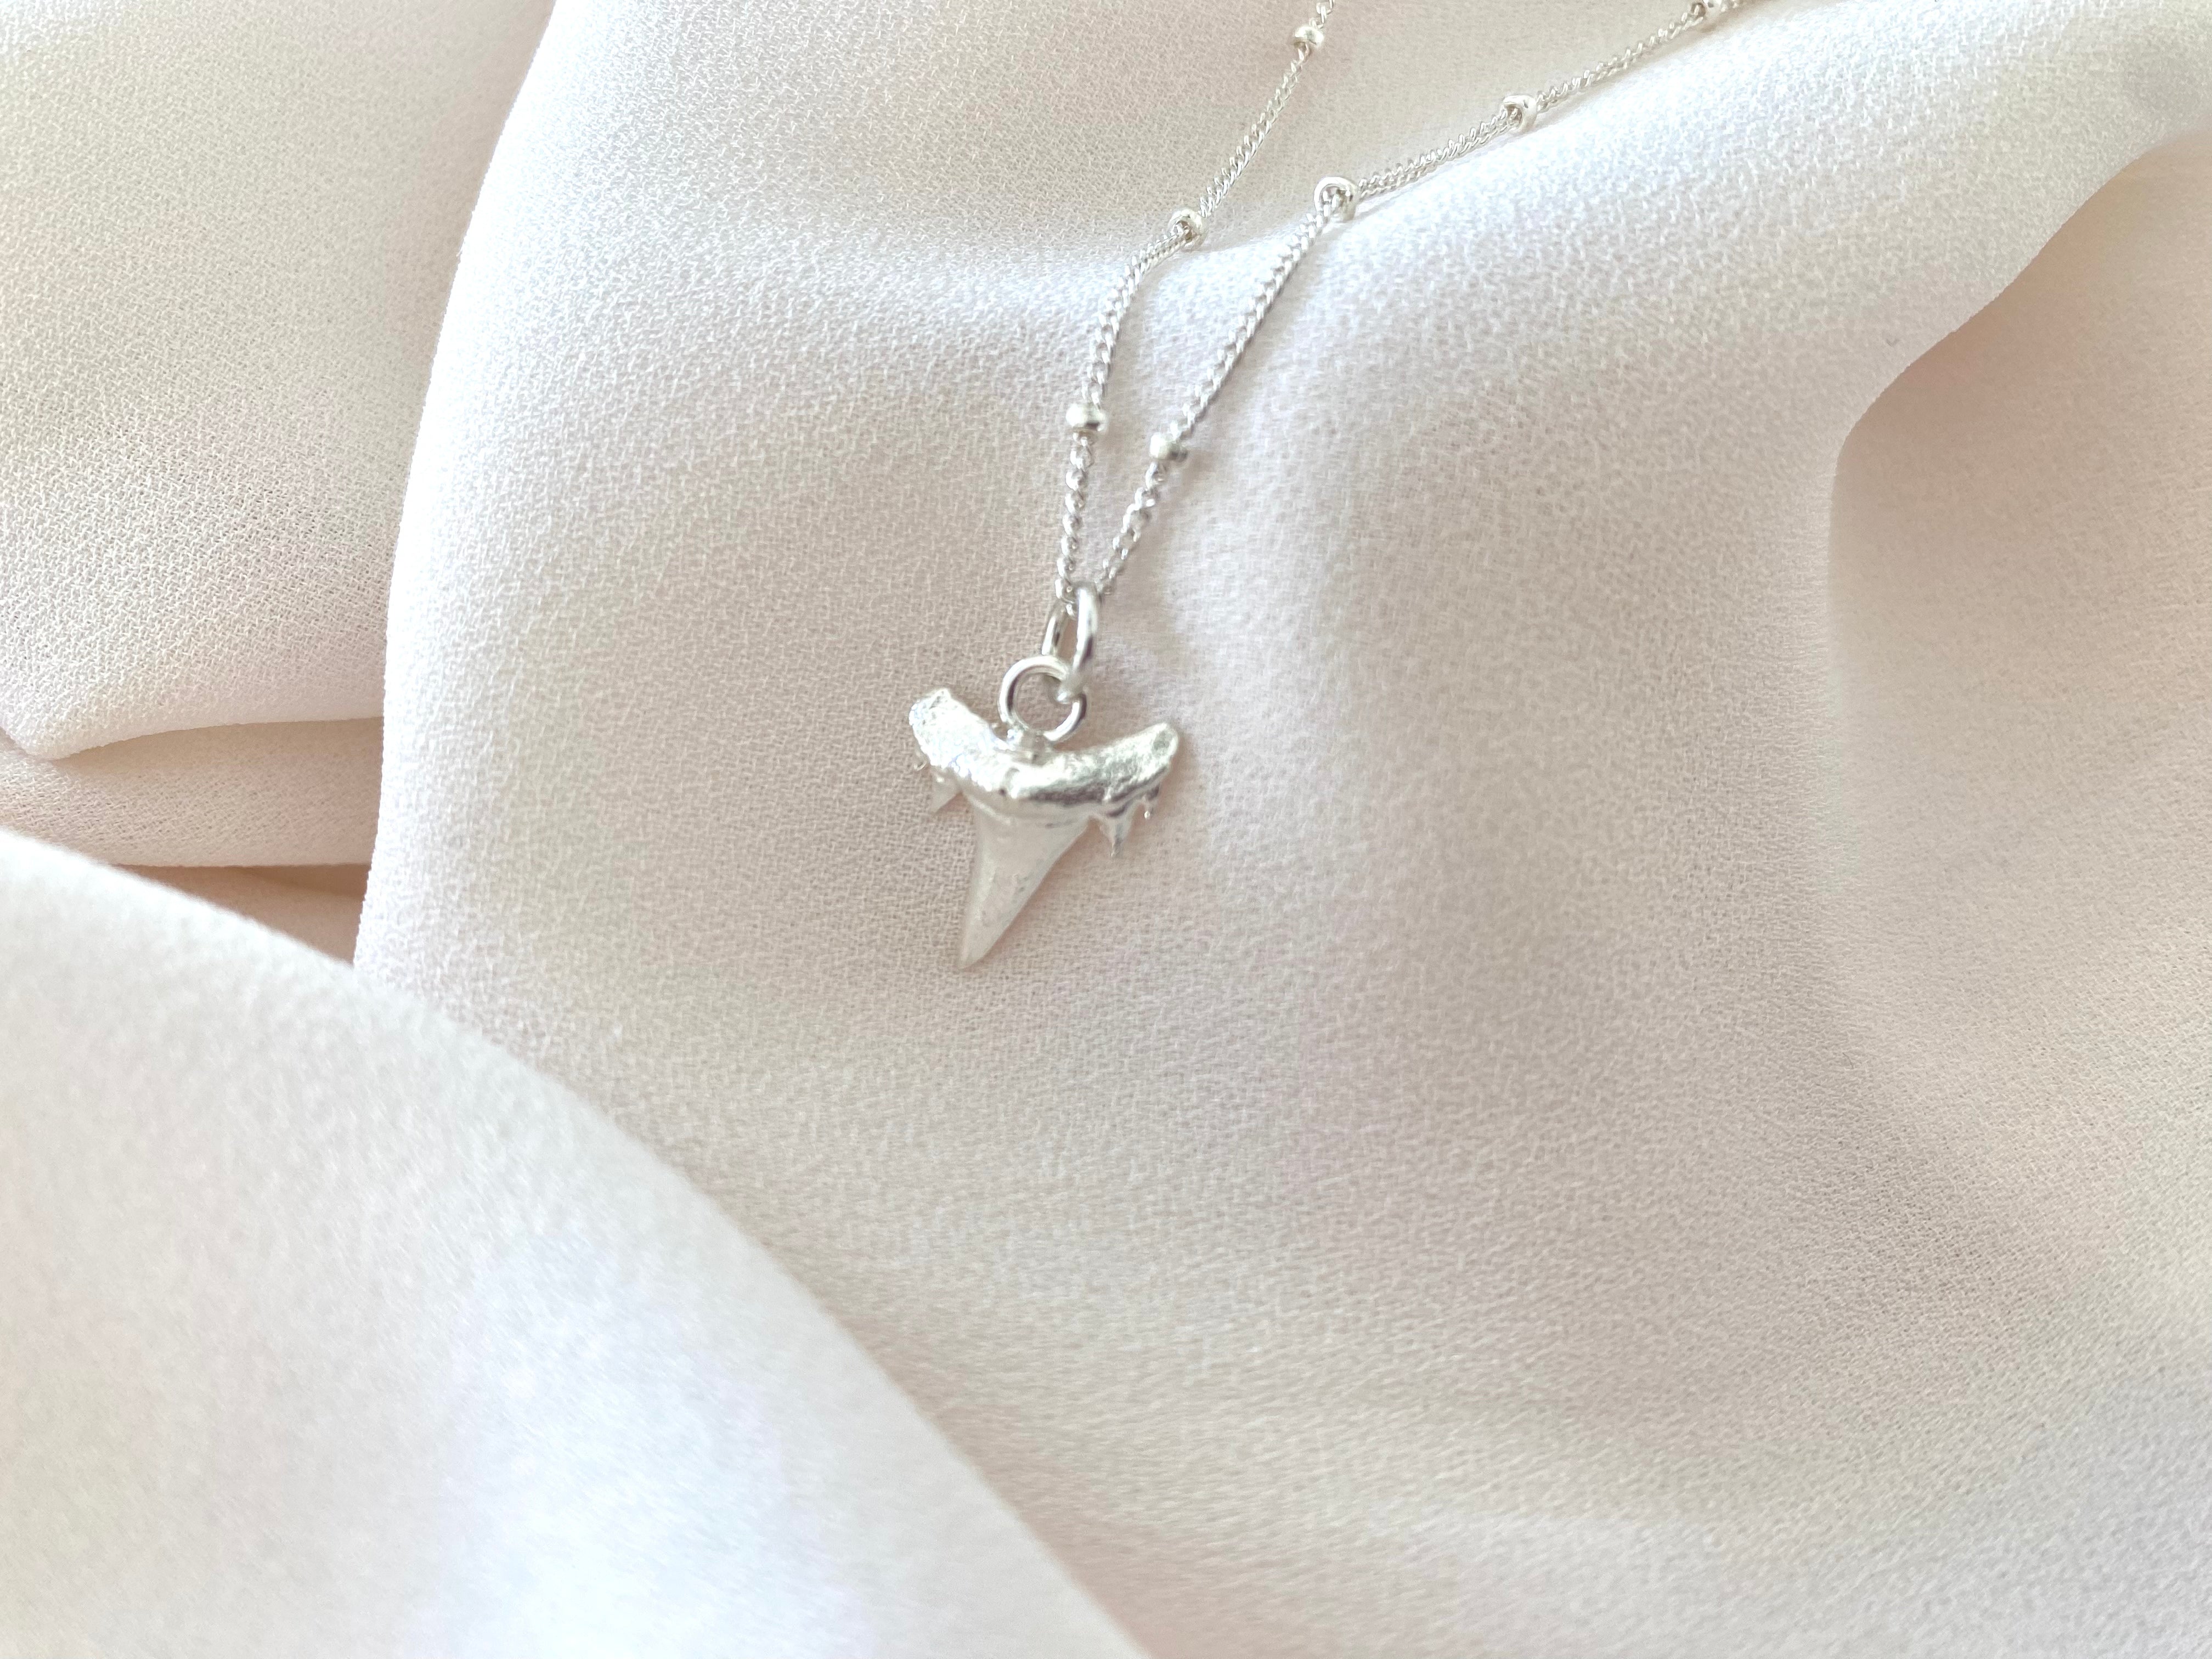 Dainty Sterling Silver Shark Tooth Pendant Necklace